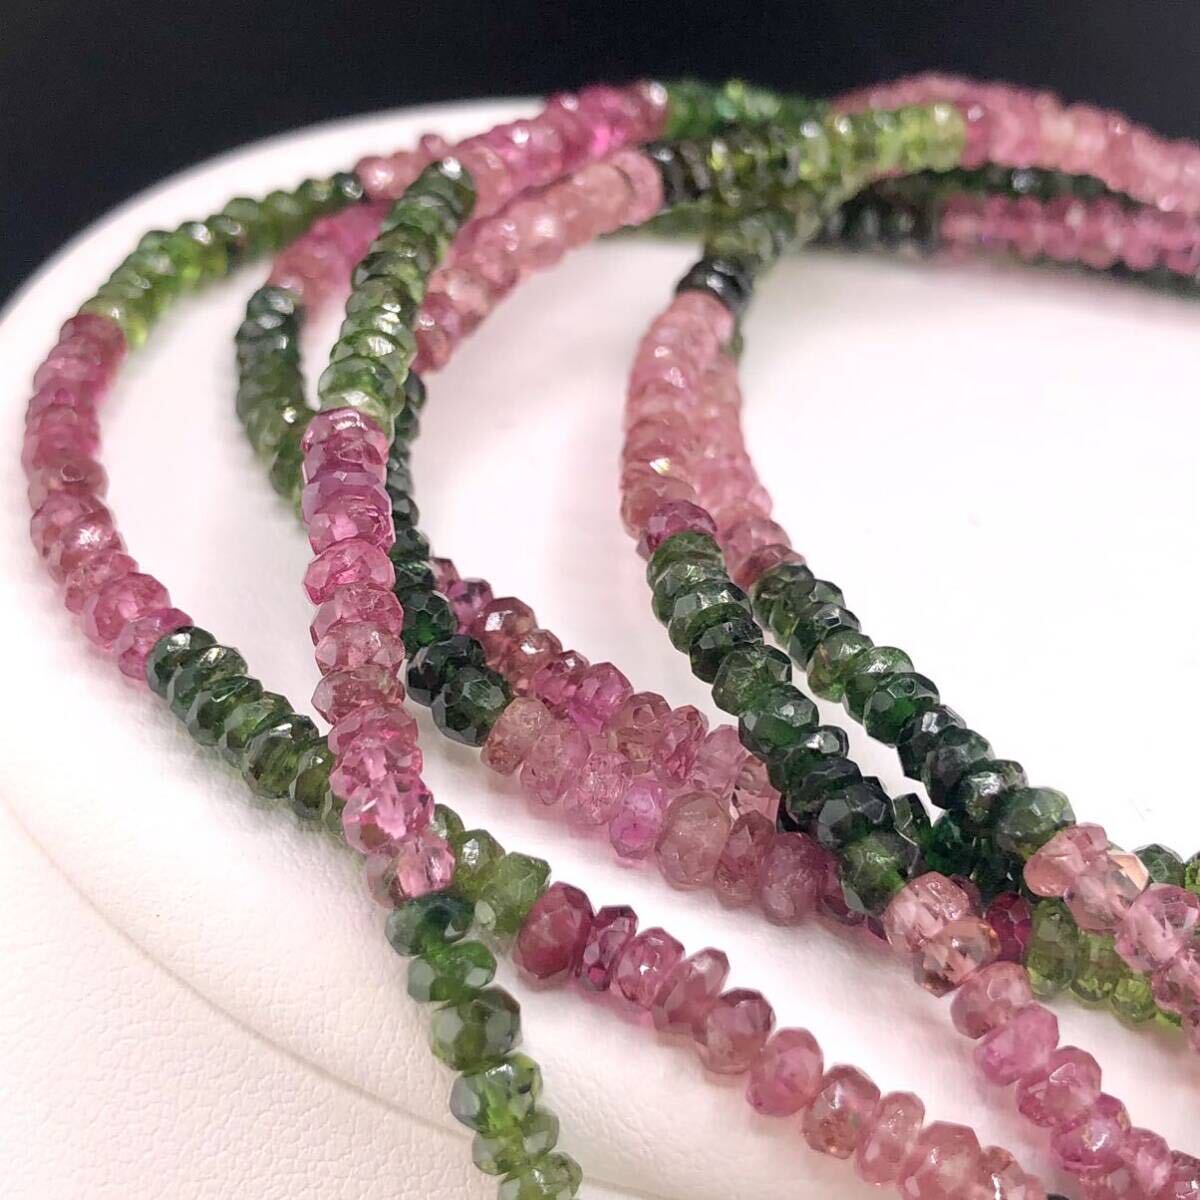 E03-7074 3連☆トルマリンネックレス 約52cm 45g ( tourmaline necklace SILVER jewelry )_画像1